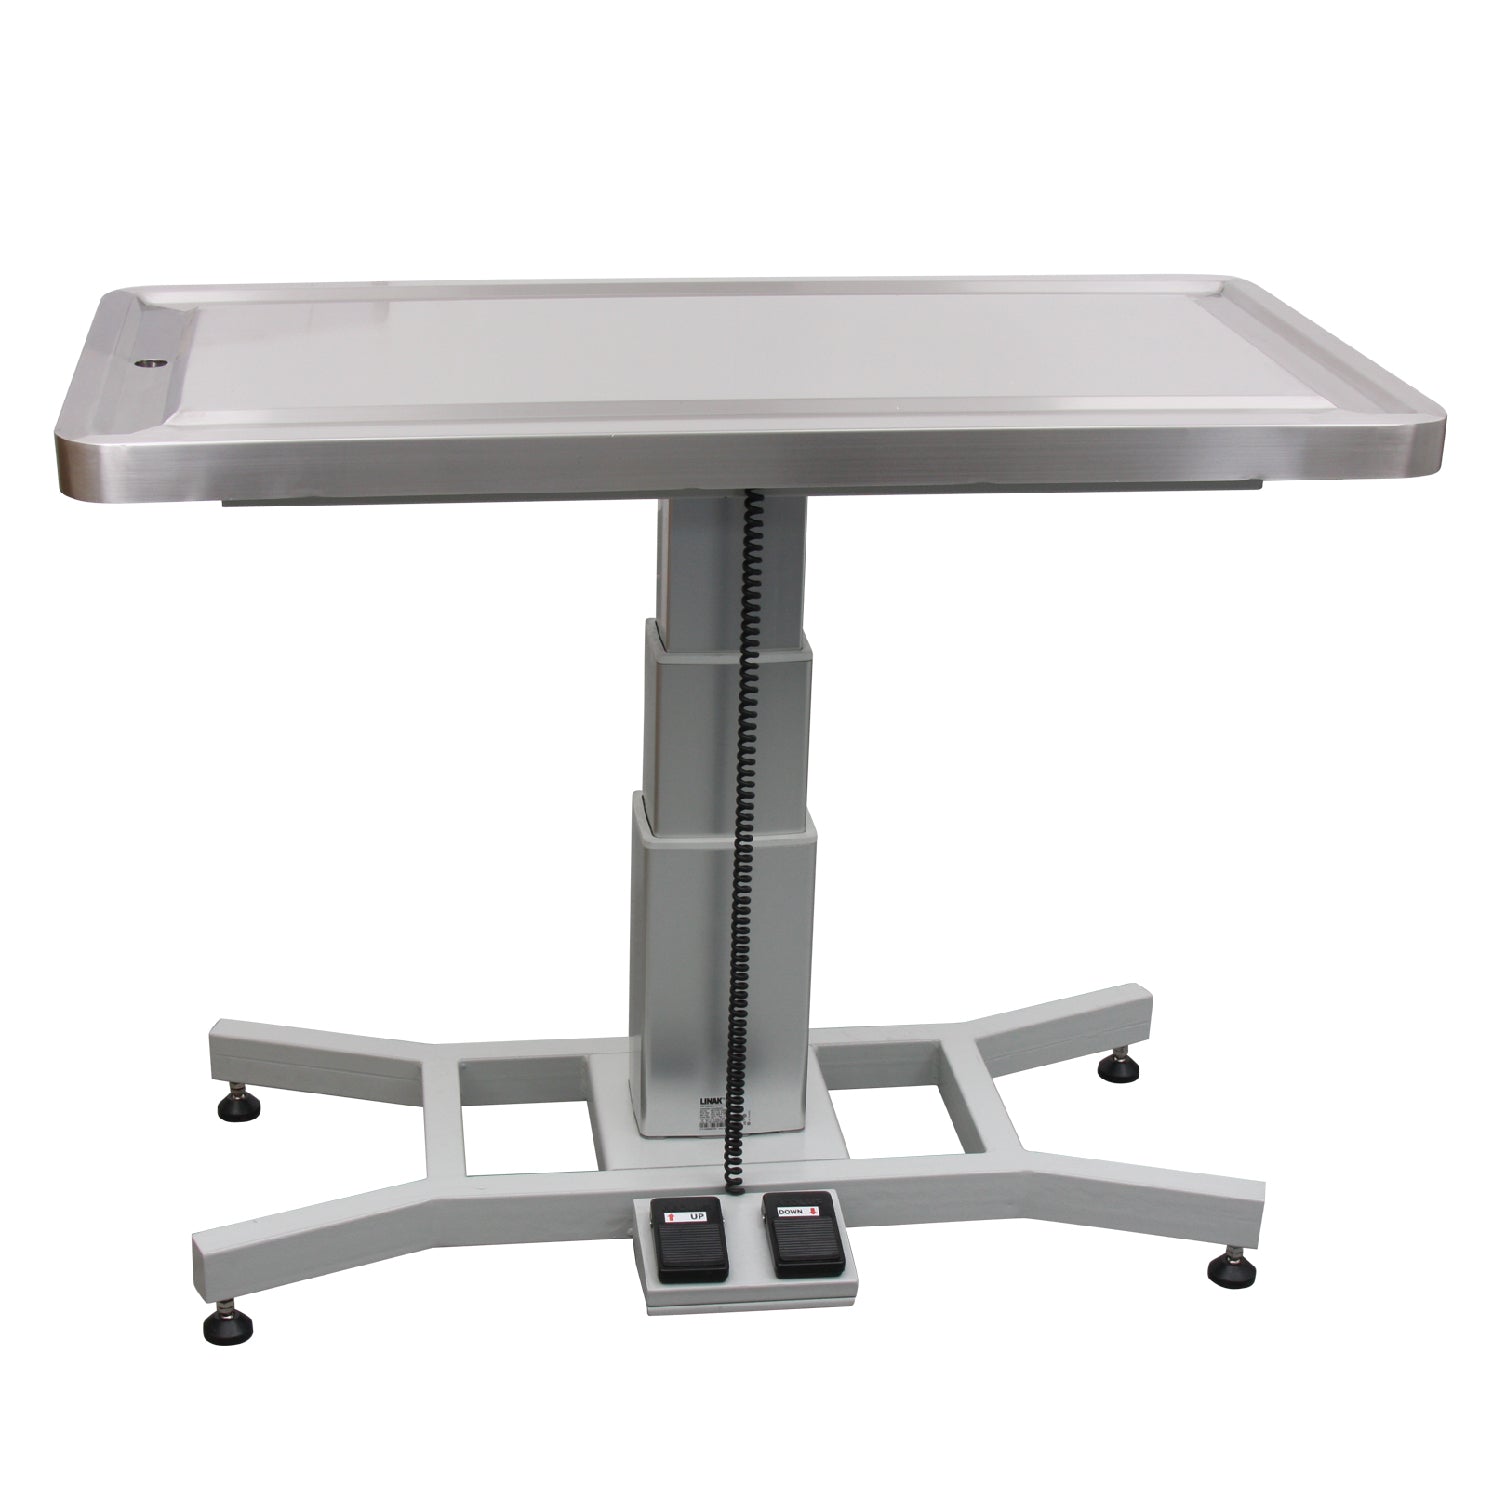 IVT-U880 Surgical Table